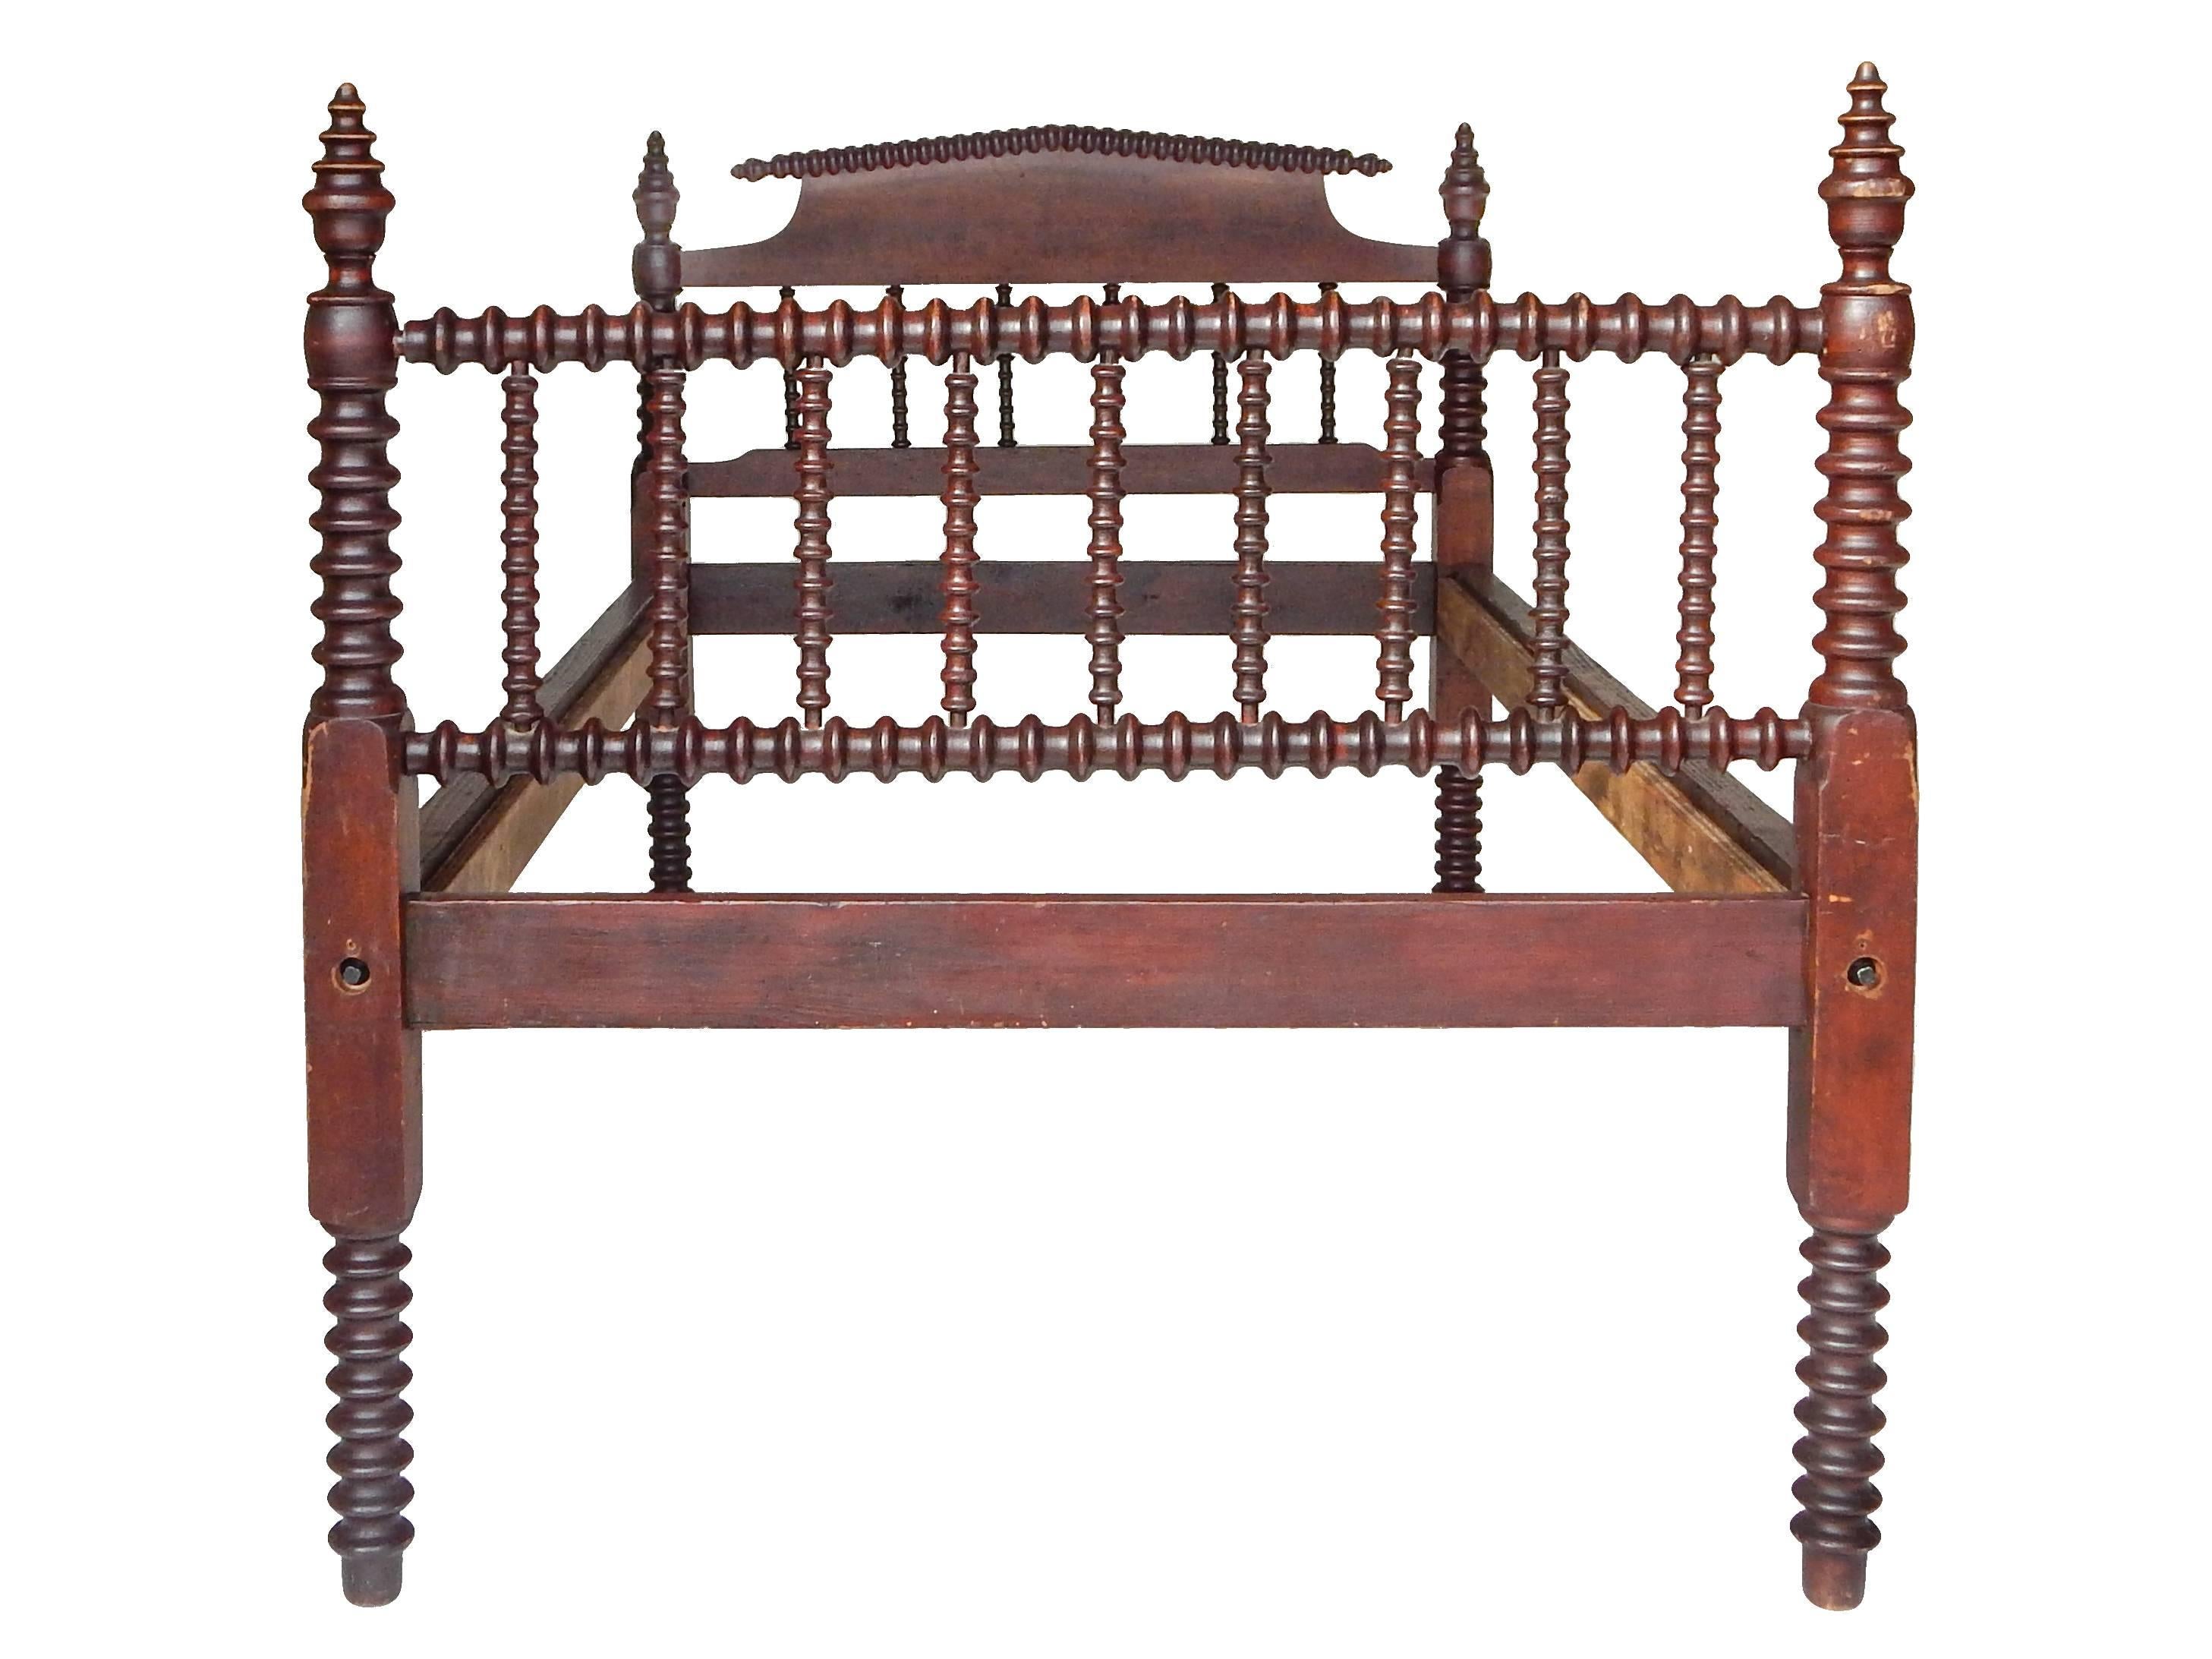 American Classical Stunning Spindle Beds For Sale